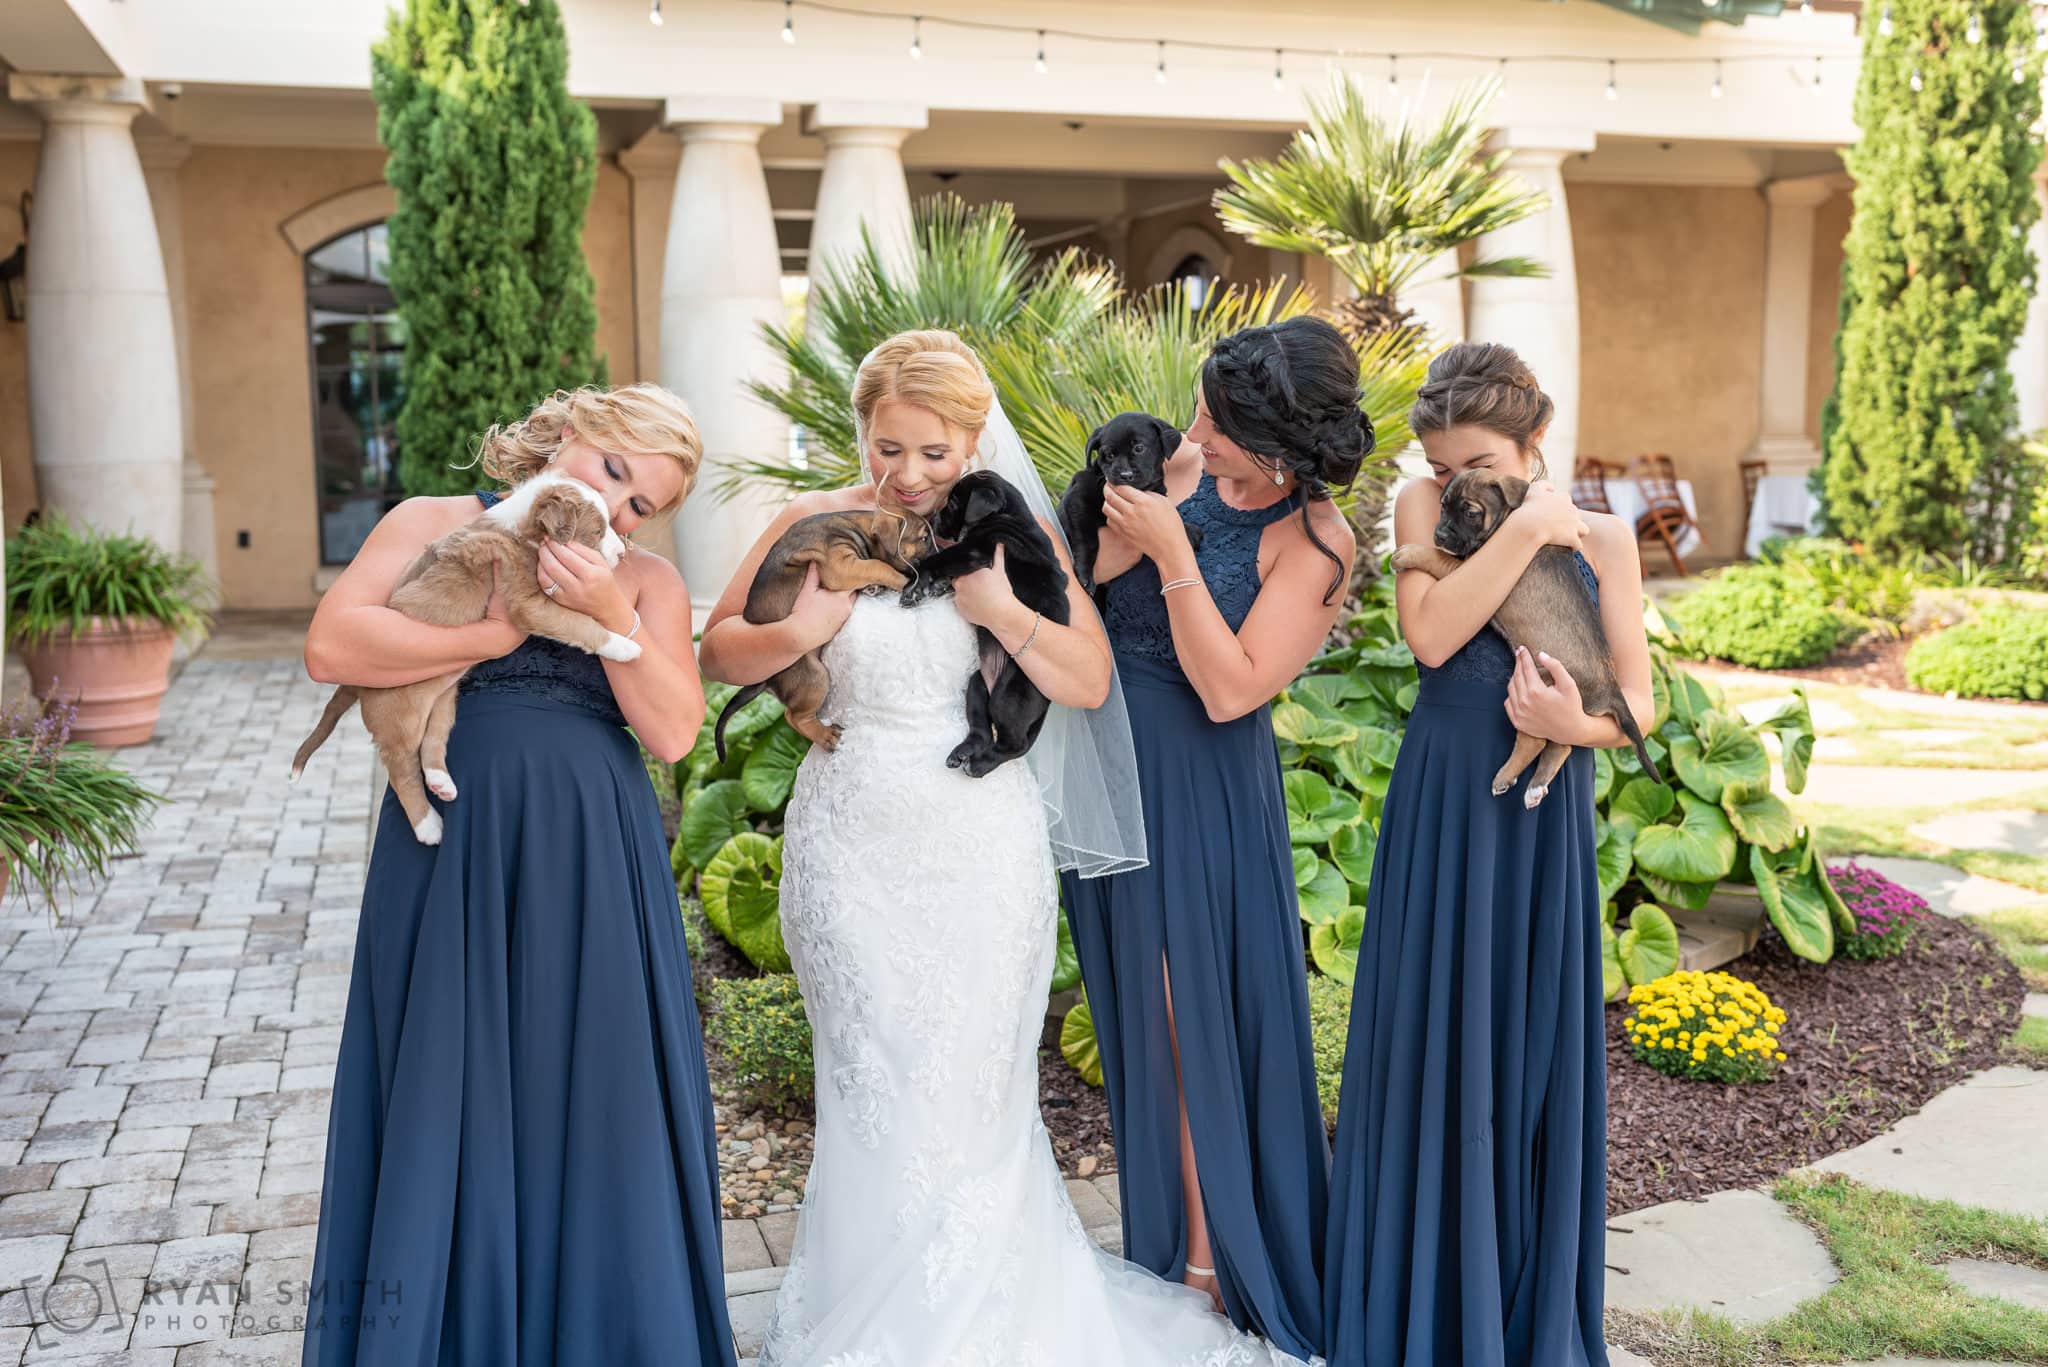 Bridesmaids snuggling the puppies - 21 Main Events - North Myrtle Beach